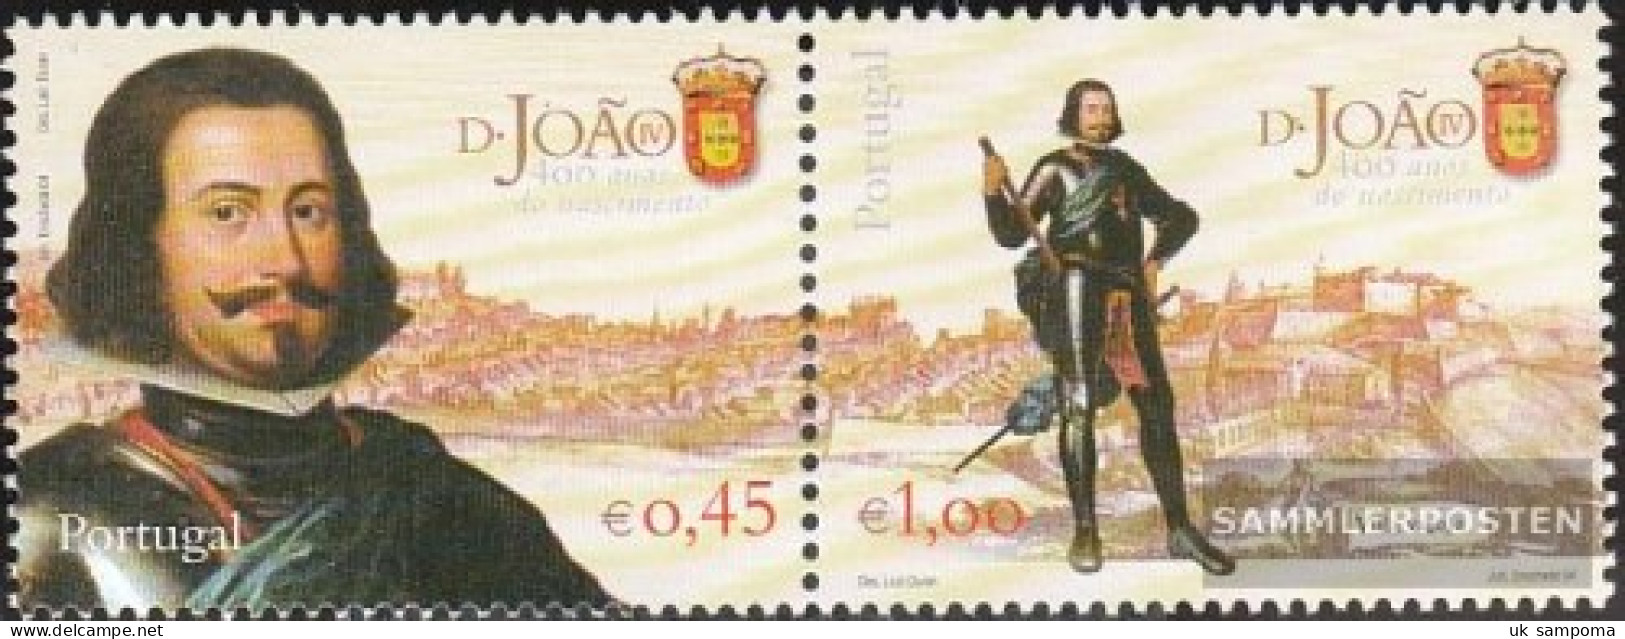 Portugal 2760-2761 Couple (complete Issue) Unmounted Mint / Never Hinged 2004 King Johann IV. - Unused Stamps